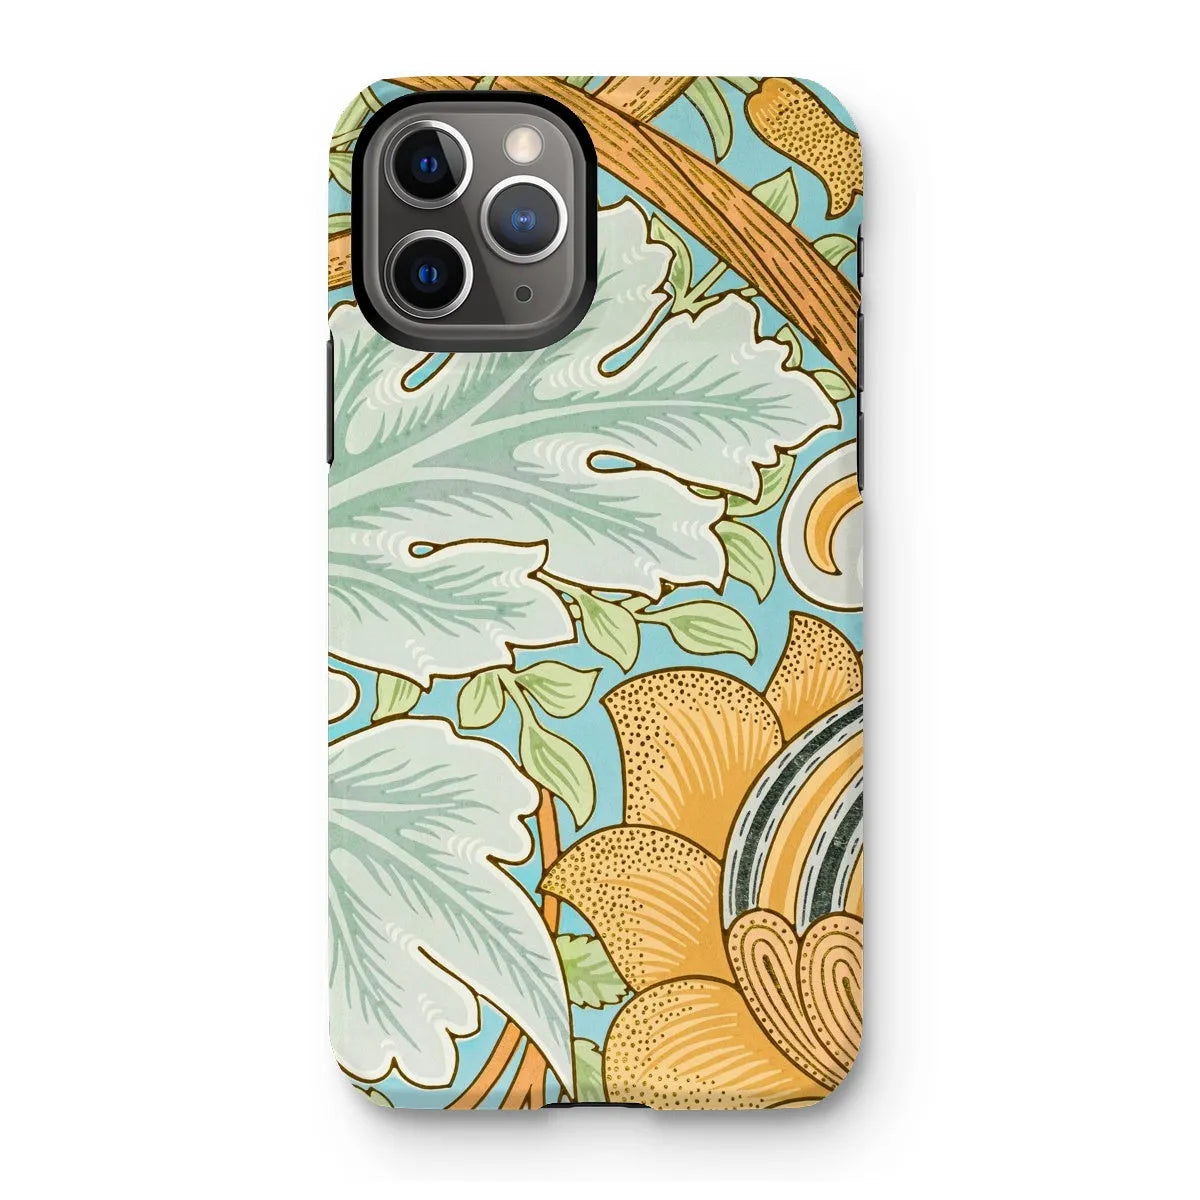 St. James - Arts And Crafts Phone Case - William Morris - Iphone 11 Pro / Matte - Mobile Phone Cases - Aesthetic Art